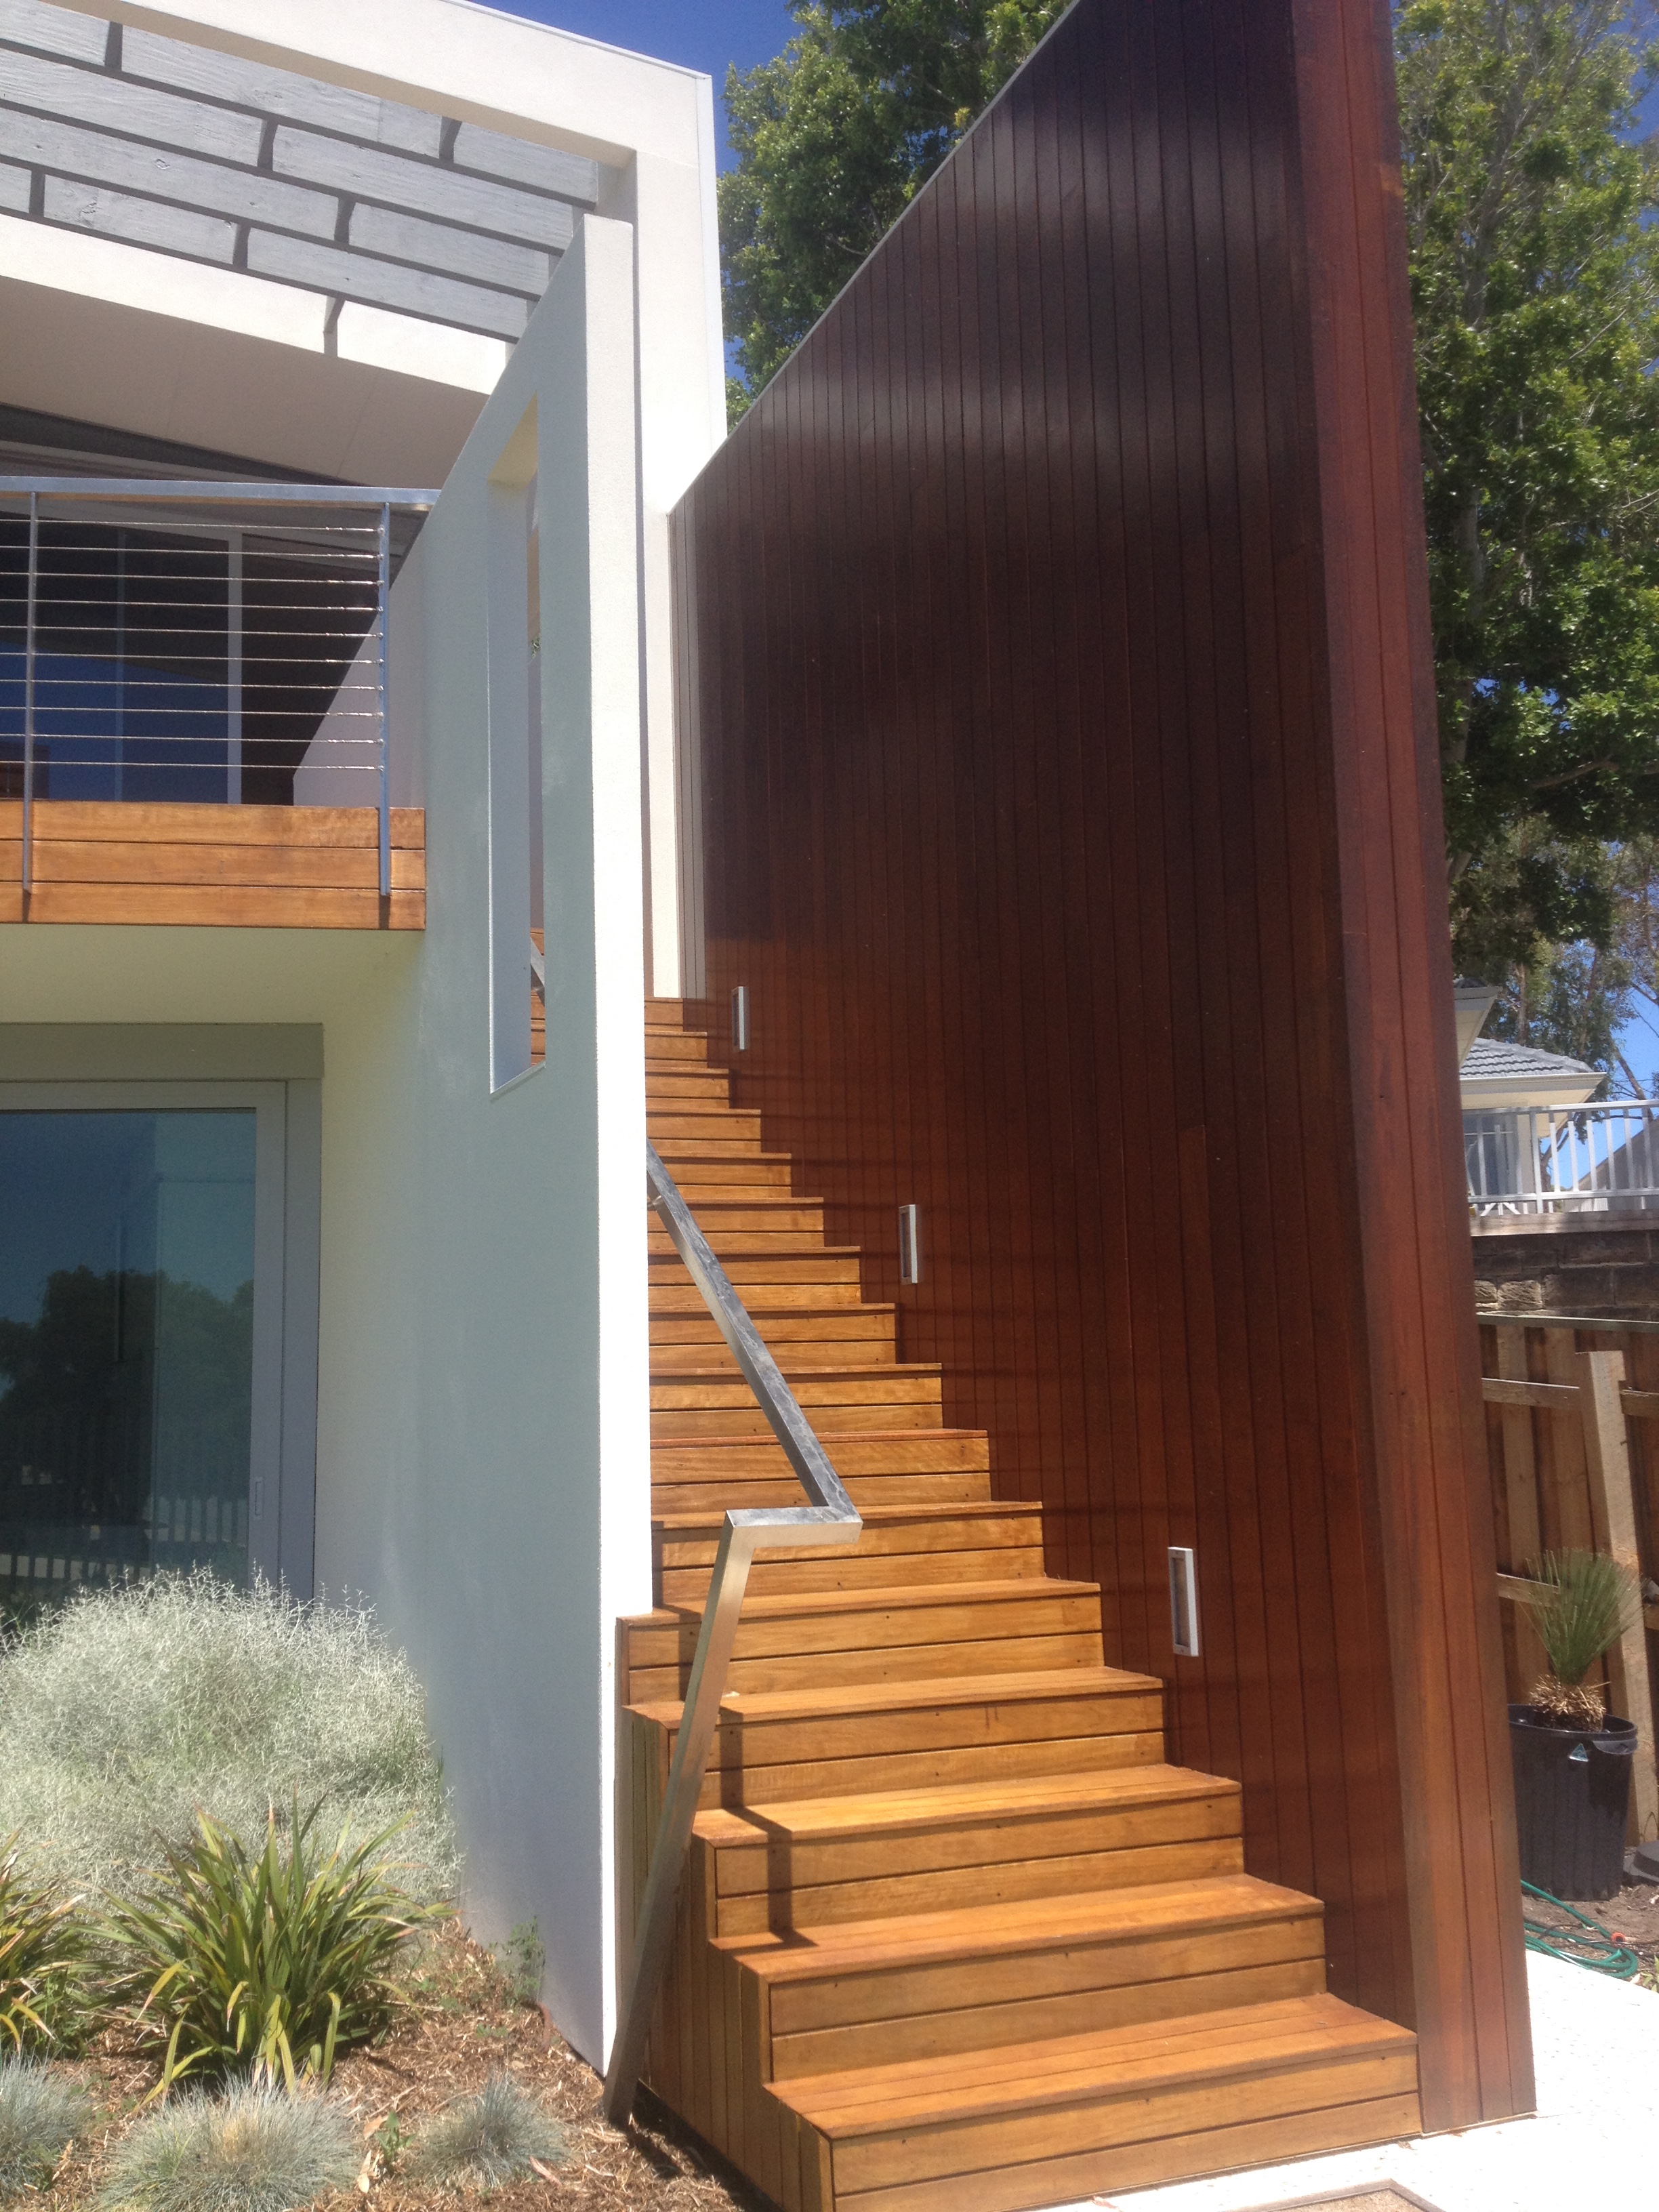 Shot of wooden exterior staircase painted in light and dark brown stain